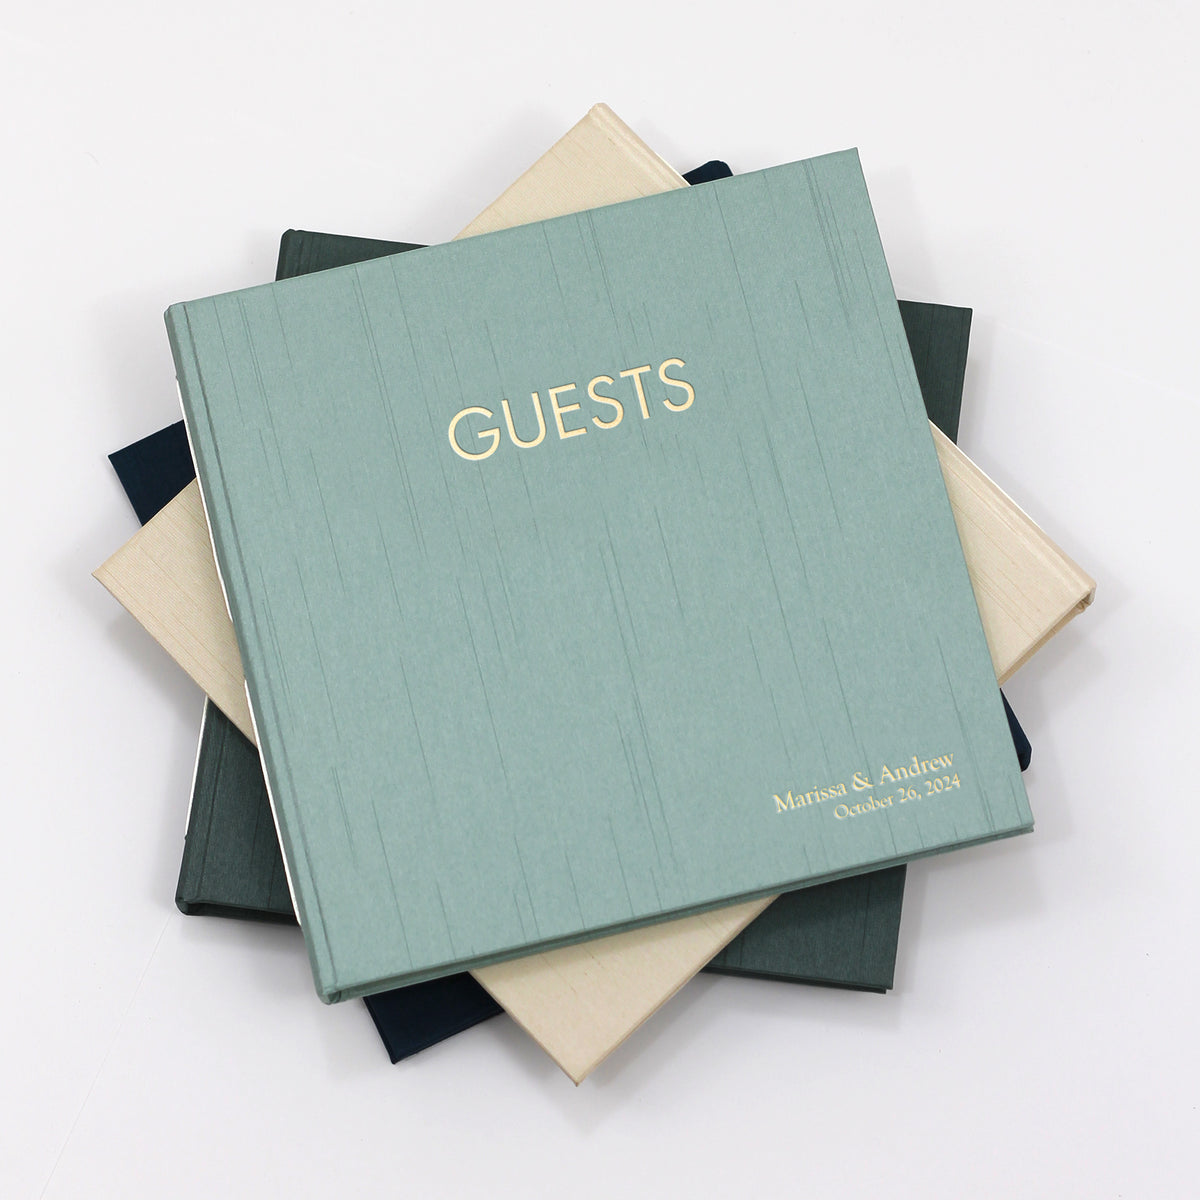 Event Guestbook Embossed with “Guests” | Cover: Coral Cotton | Available Personalized